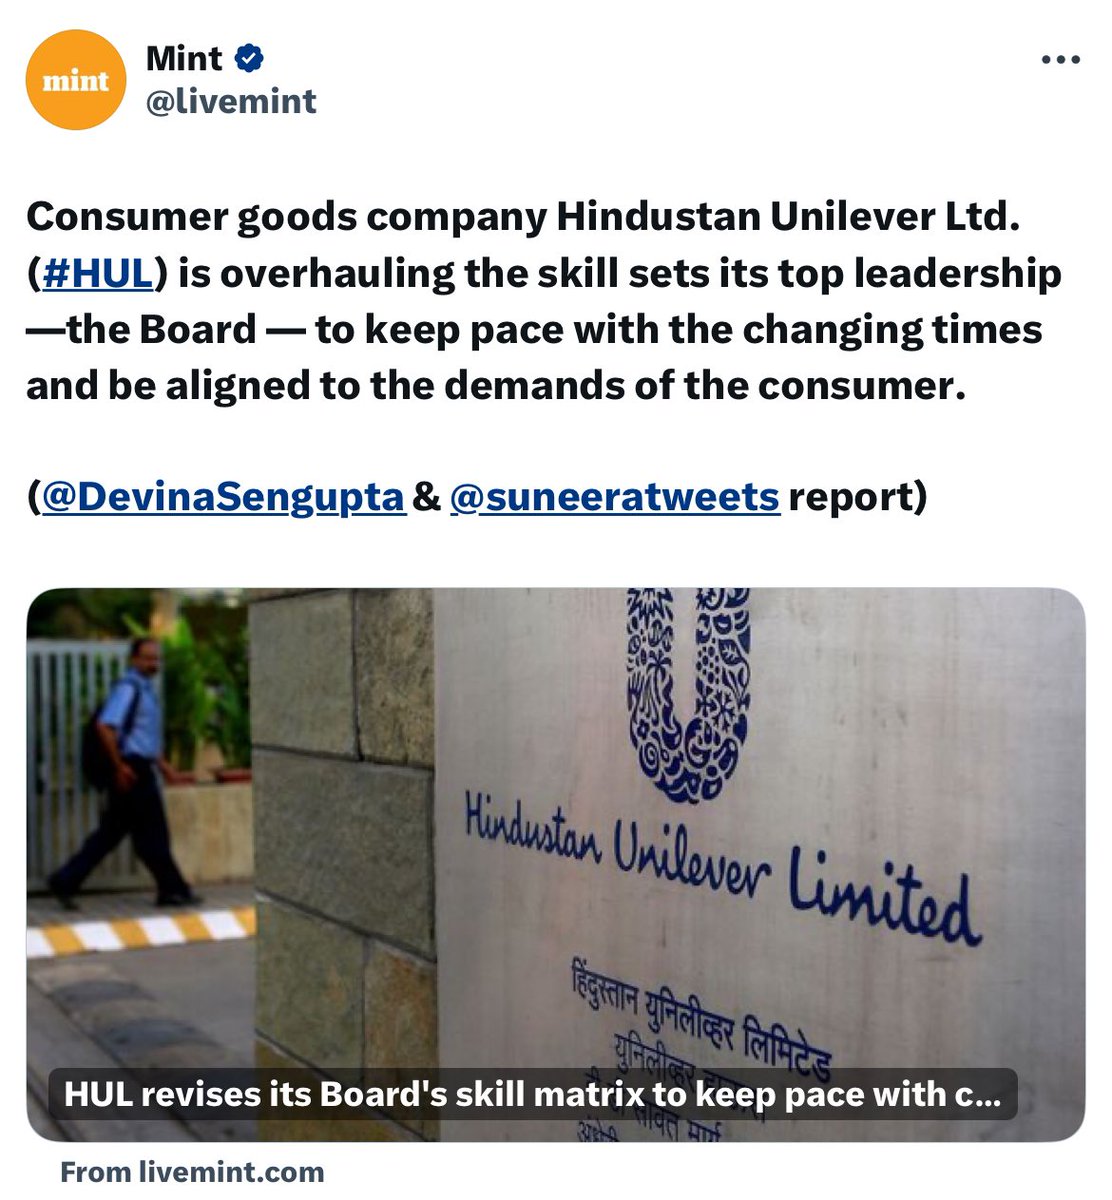 This initiative is likely to enhance the company's ability to innovate and meet consumer expectations, ultimately strengthening its competitive edge in the consumer goods industry.